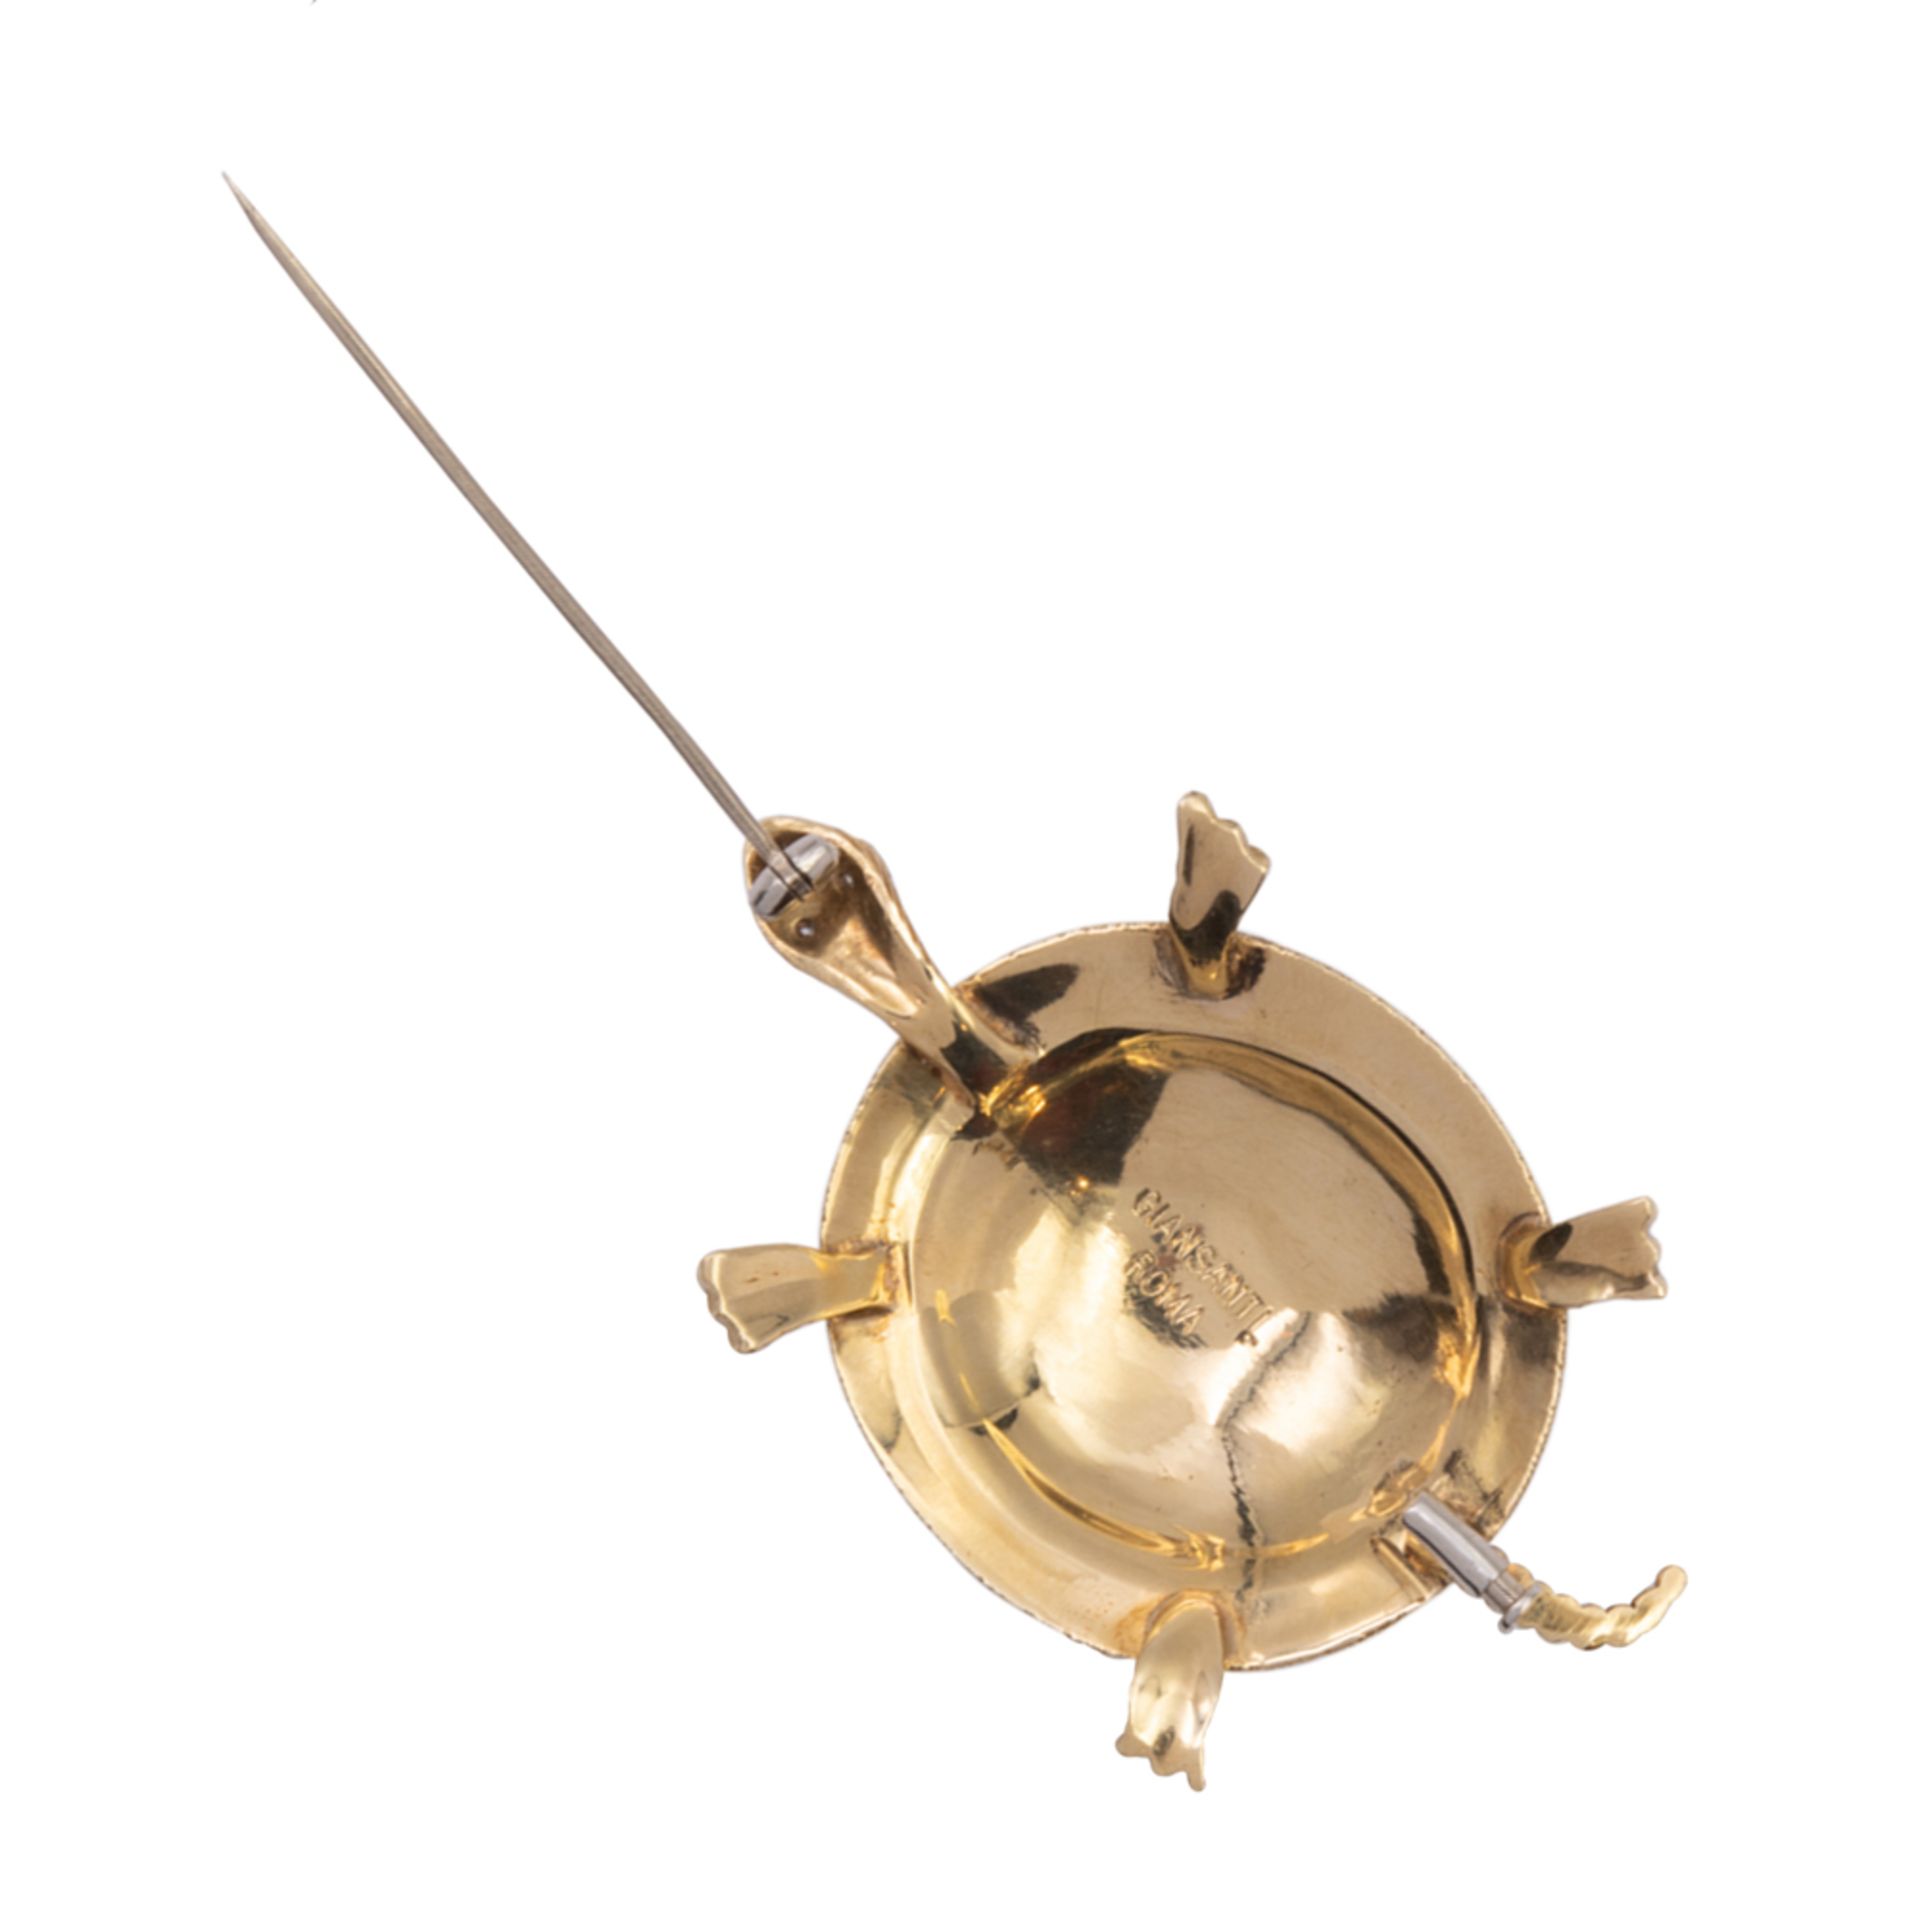 Turtle shaped brooch in 18kt yellow gold with garnet - Image 2 of 2